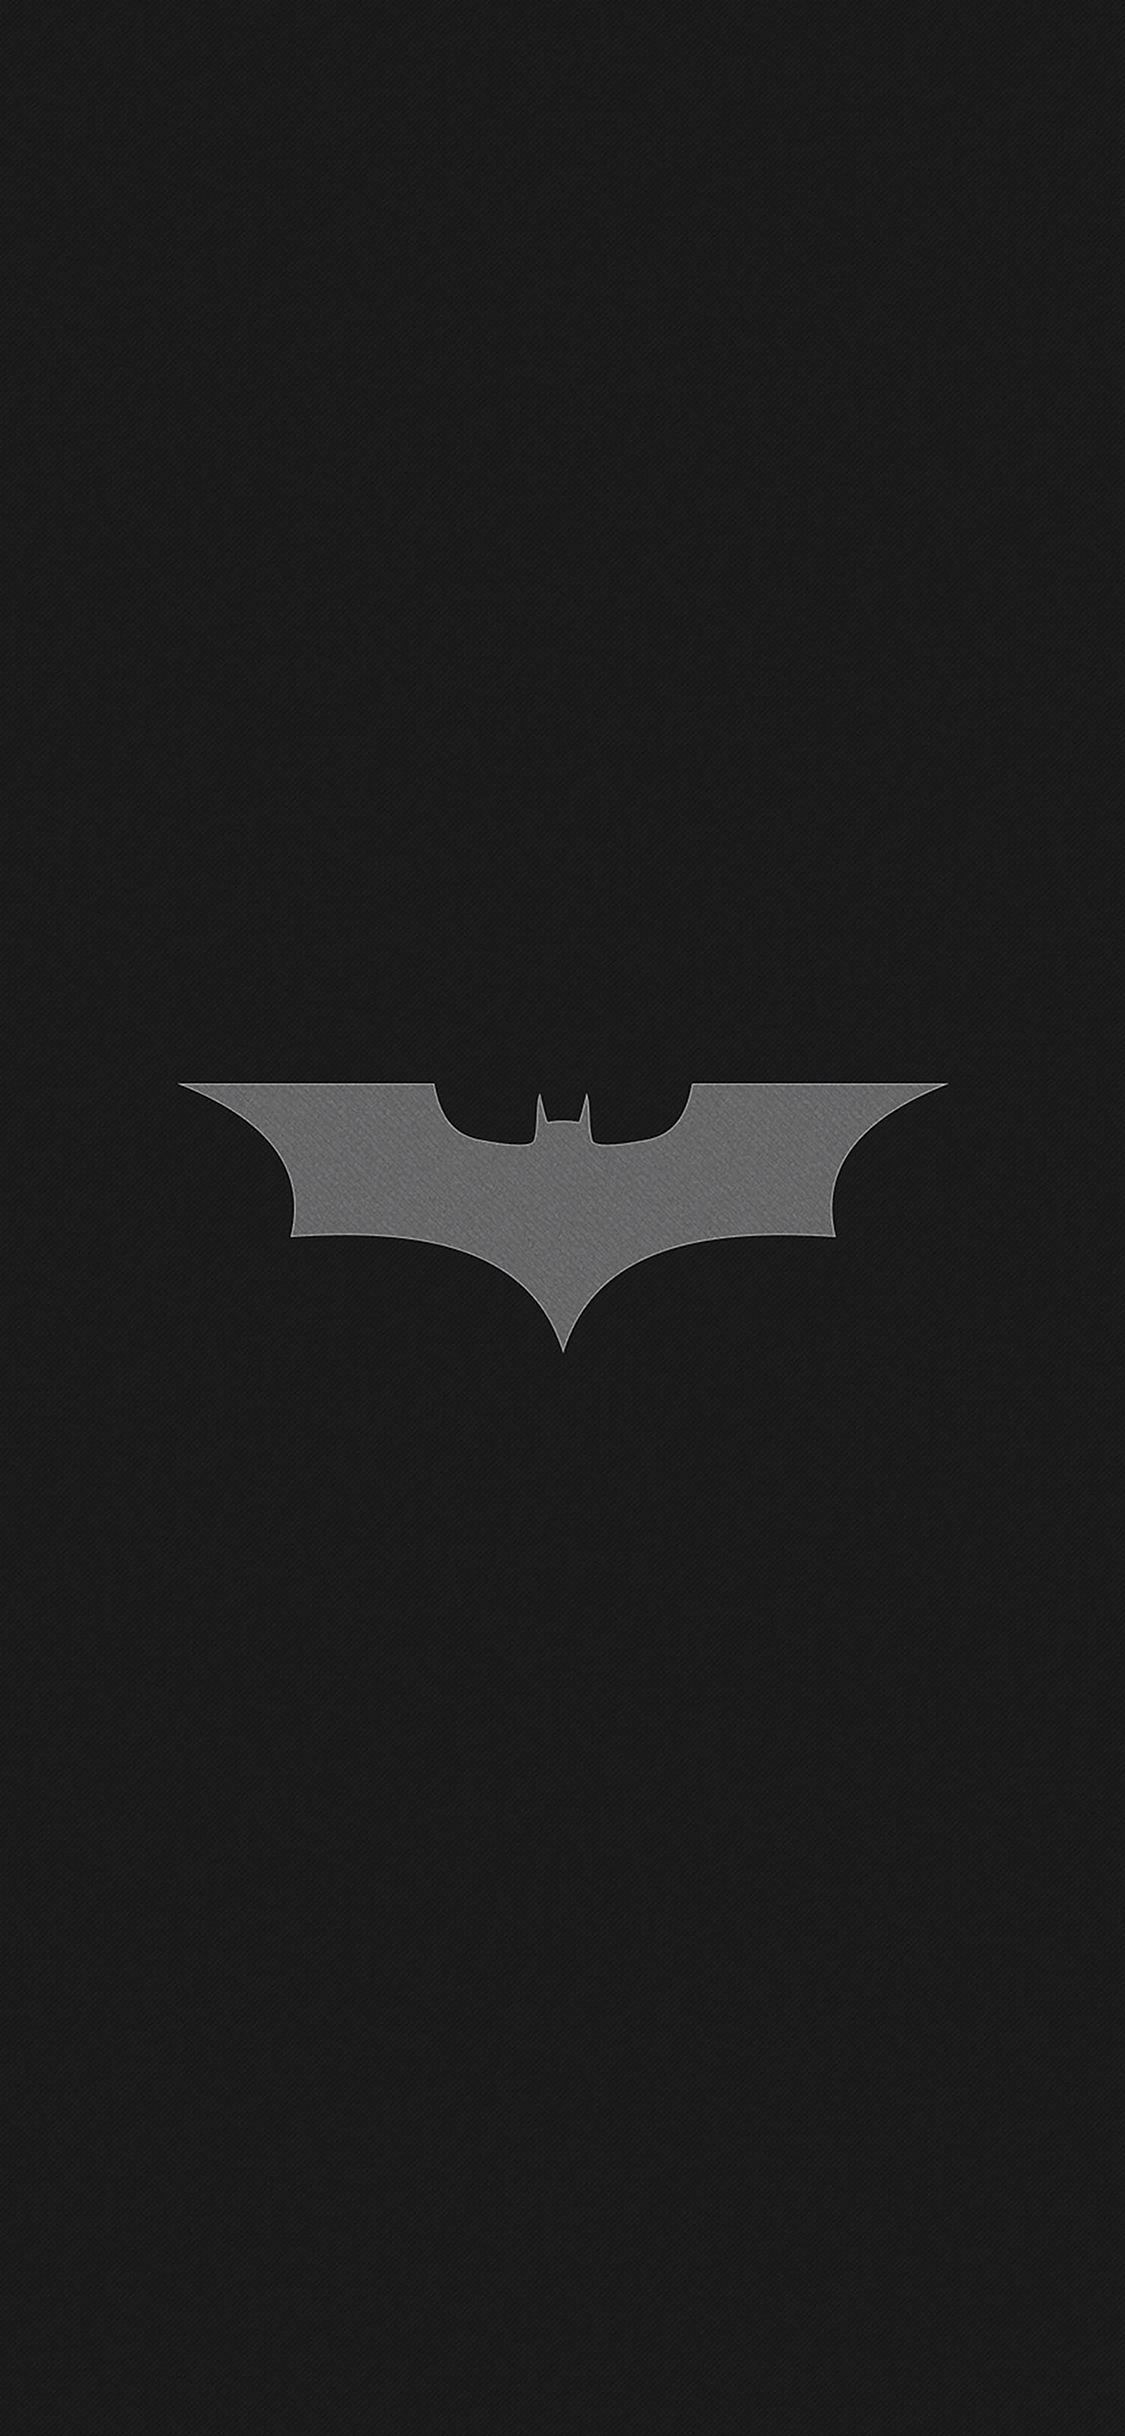 The 5 best Batman logo wallpapers for iPhone